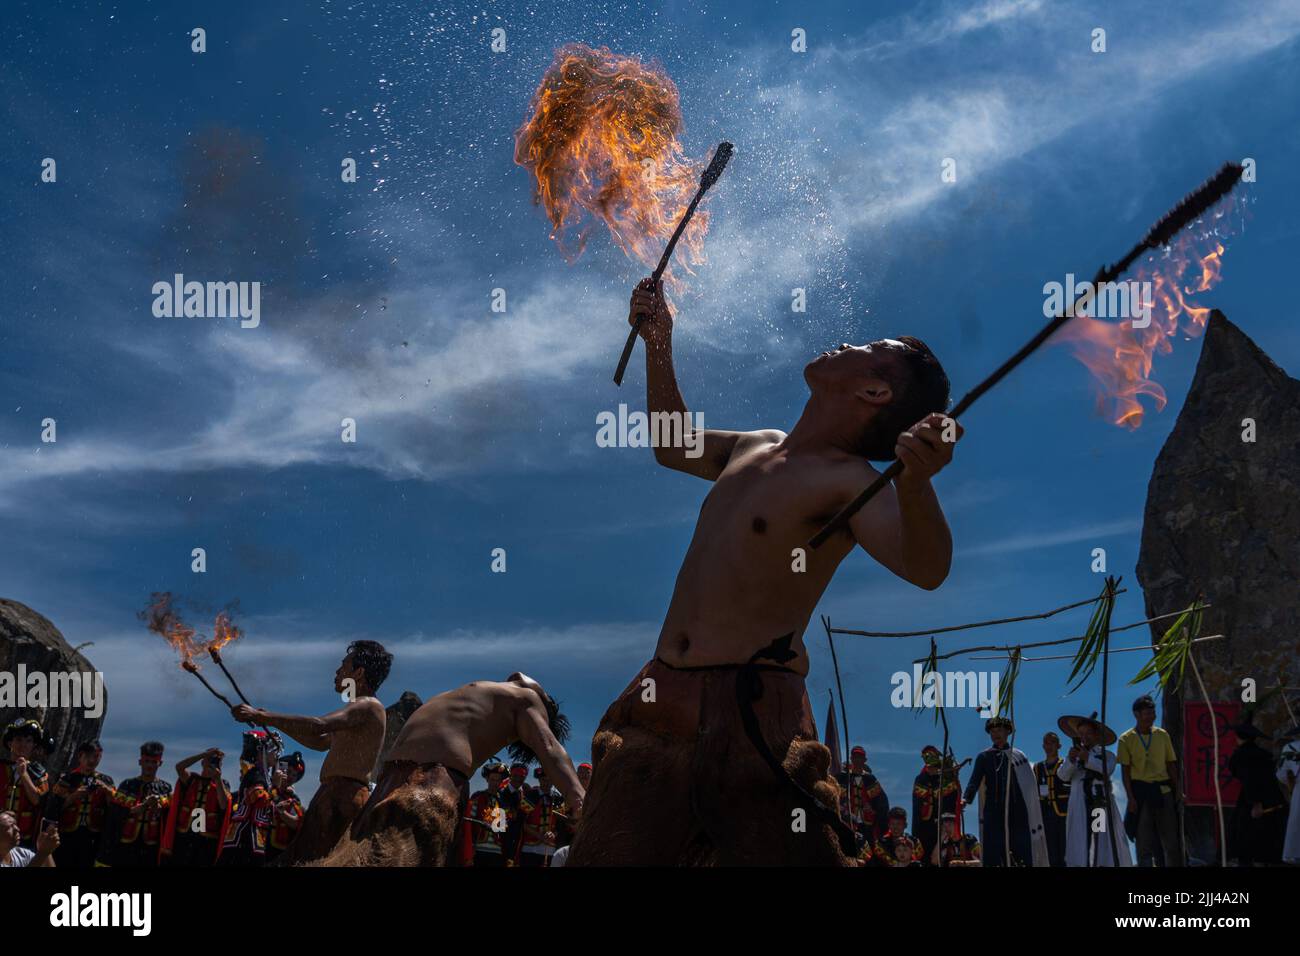 BIJIE, CHINA - JULY 22, 2022 - People of the Yi ethnic group take part in a fire lighting ceremony during the Torch Festival at Baili Azalea Managemen Stock Photo